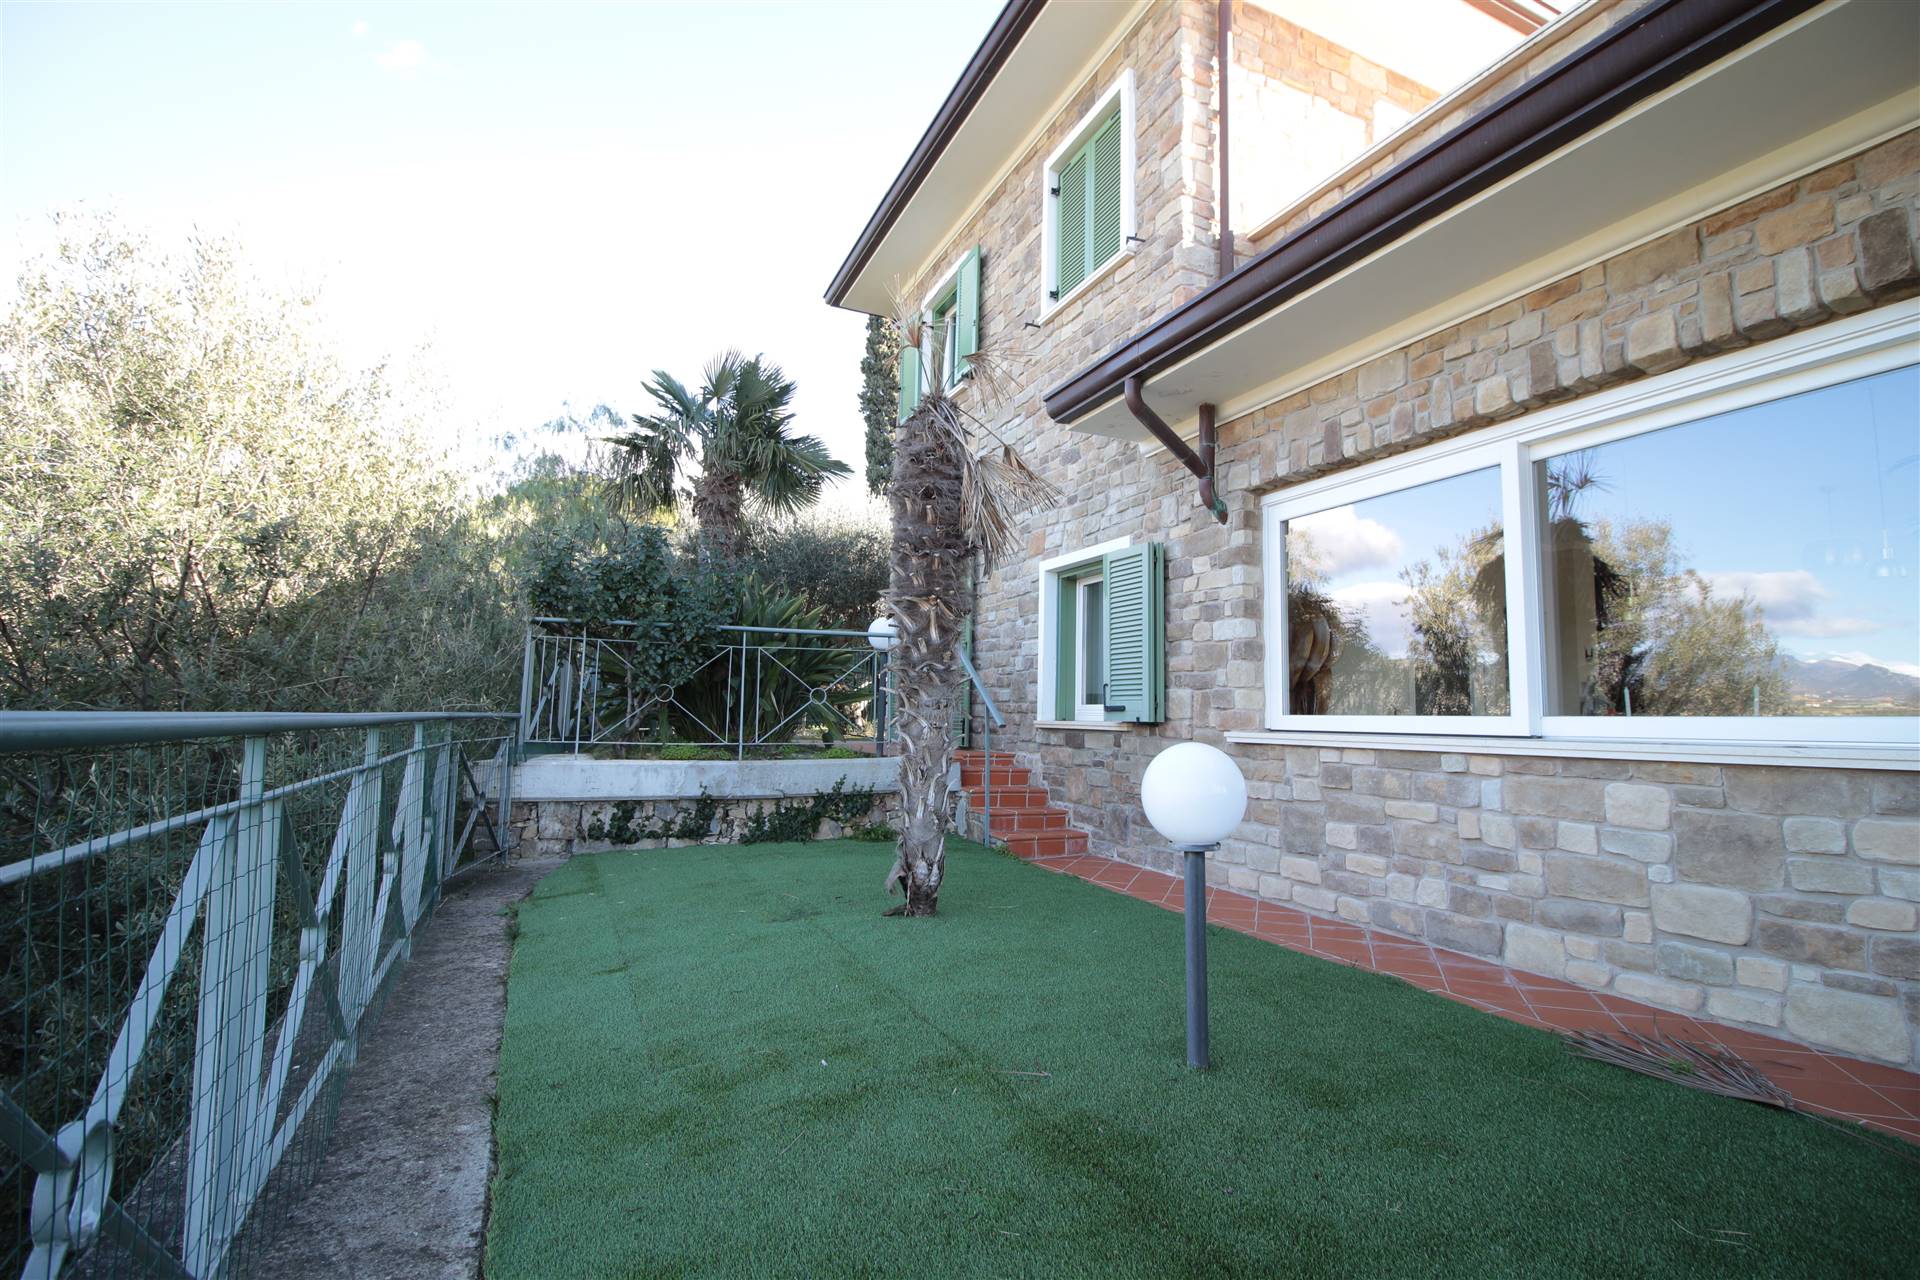 BORDIGHERA, Villa for sale of 230 Sq. mt., Almost new, Heating Individual heating system, Energetic class: C, Epi: 85,74 kwh/m2 year, composed by: 8 